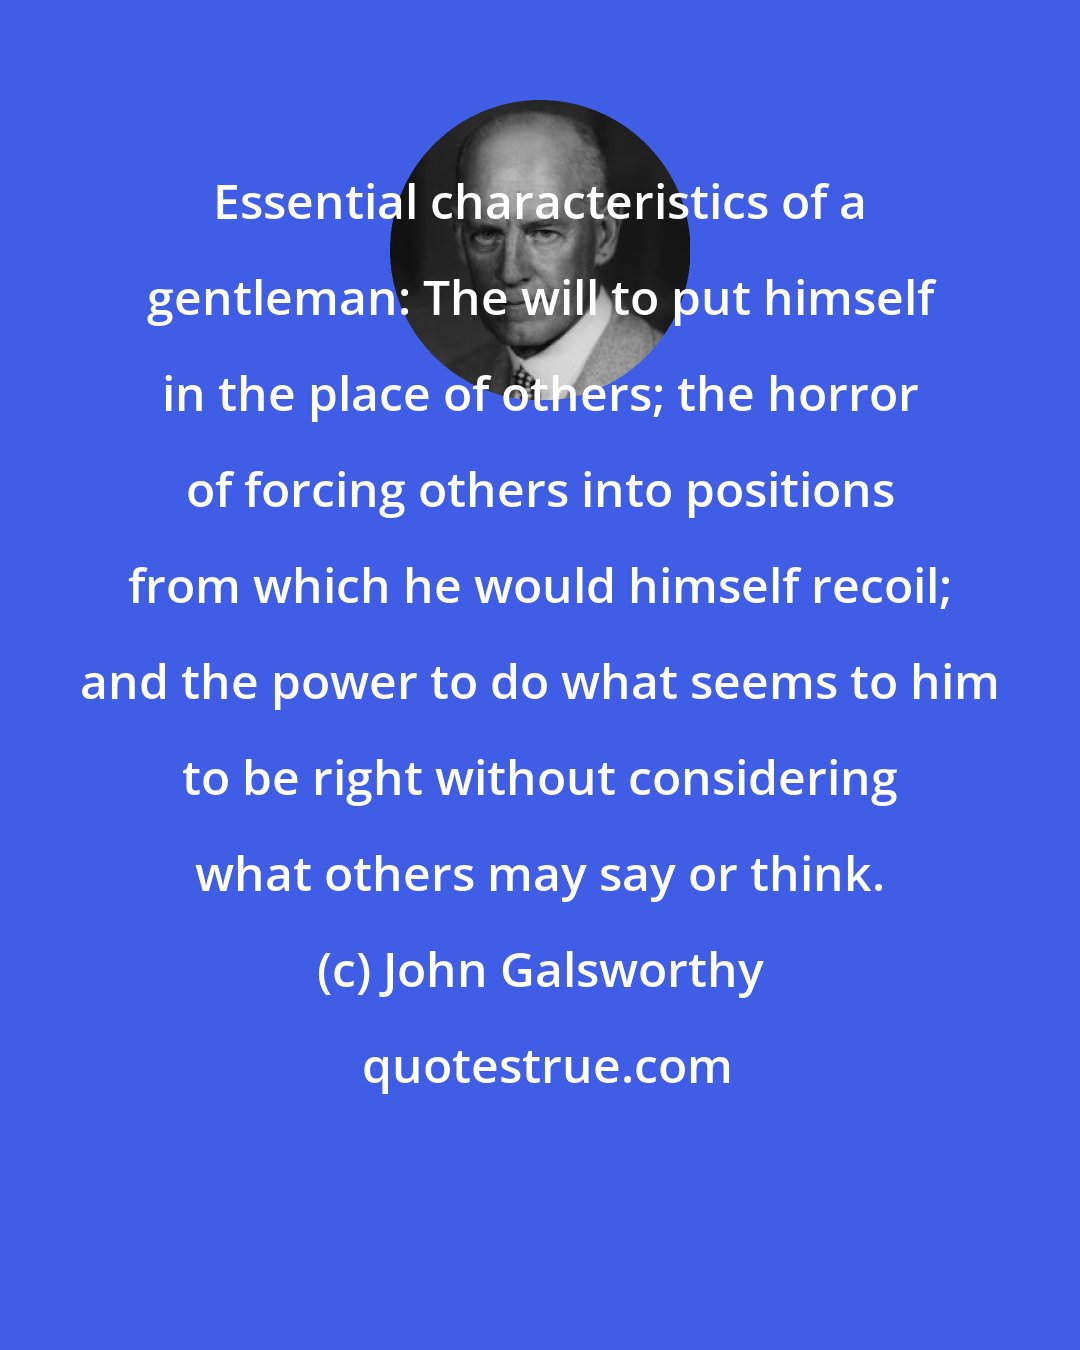 John Galsworthy: Essential characteristics of a gentleman: The will to put himself in the place of others; the horror of forcing others into positions from which he would himself recoil; and the power to do what seems to him to be right without considering what others may say or think.